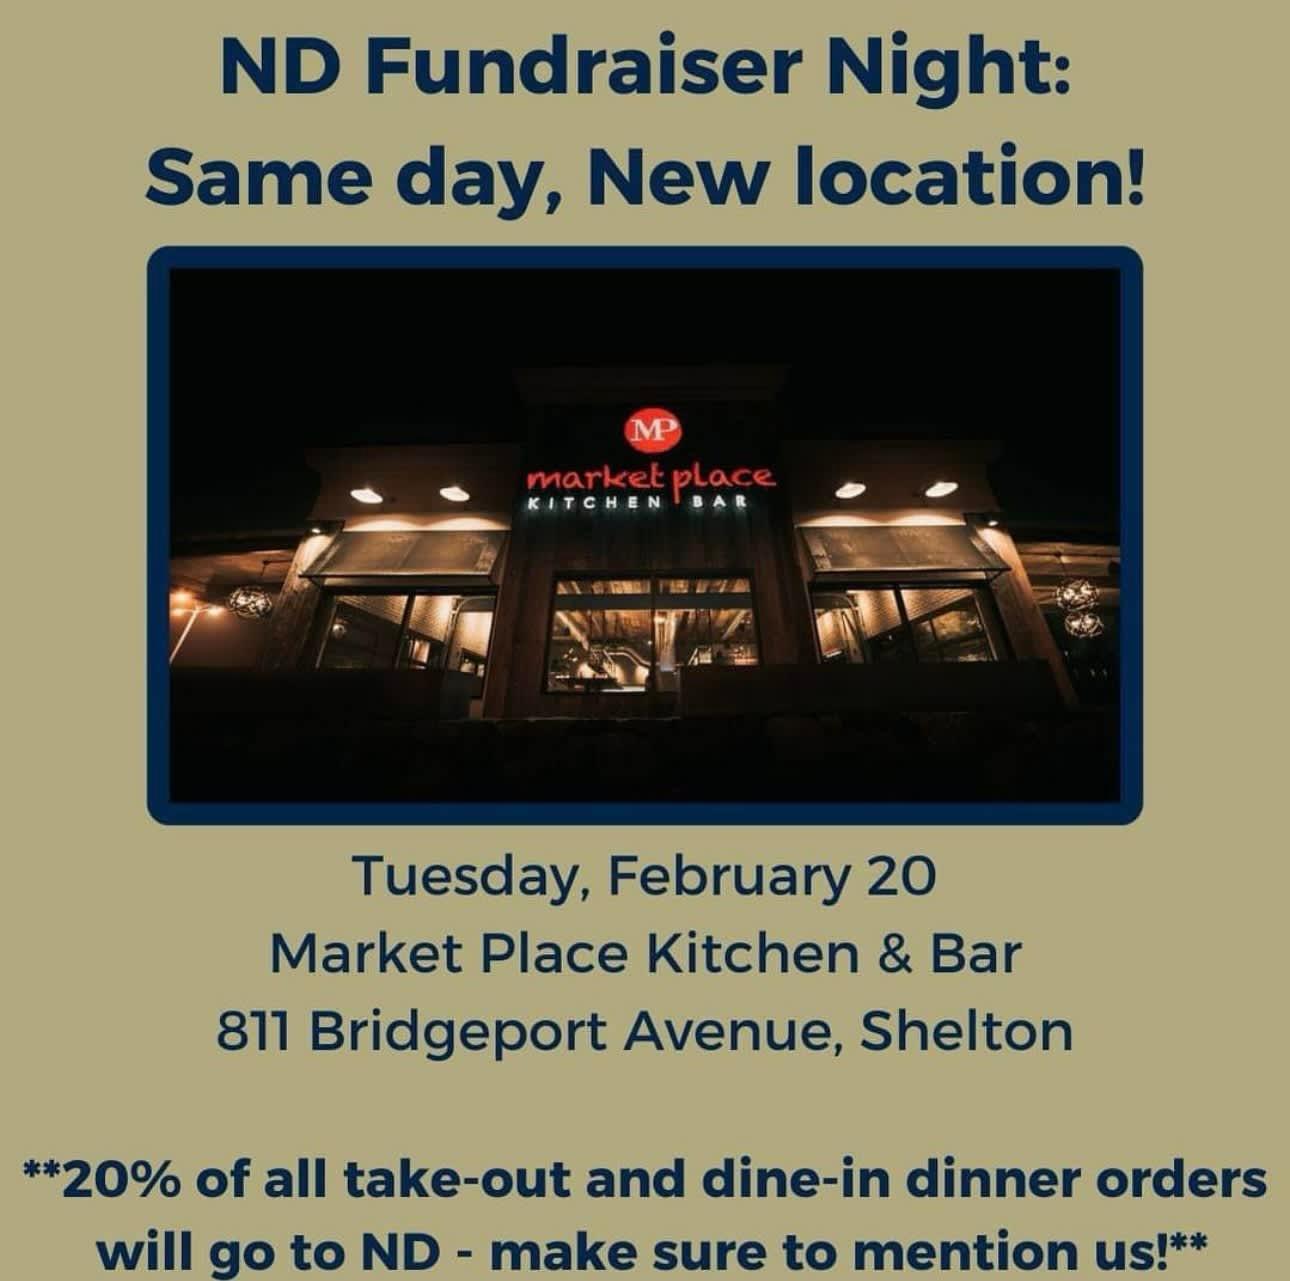 Join Us TUESDAY NIGHT 2/20 For Notre Dame Fairfield High School's Fundraiser!